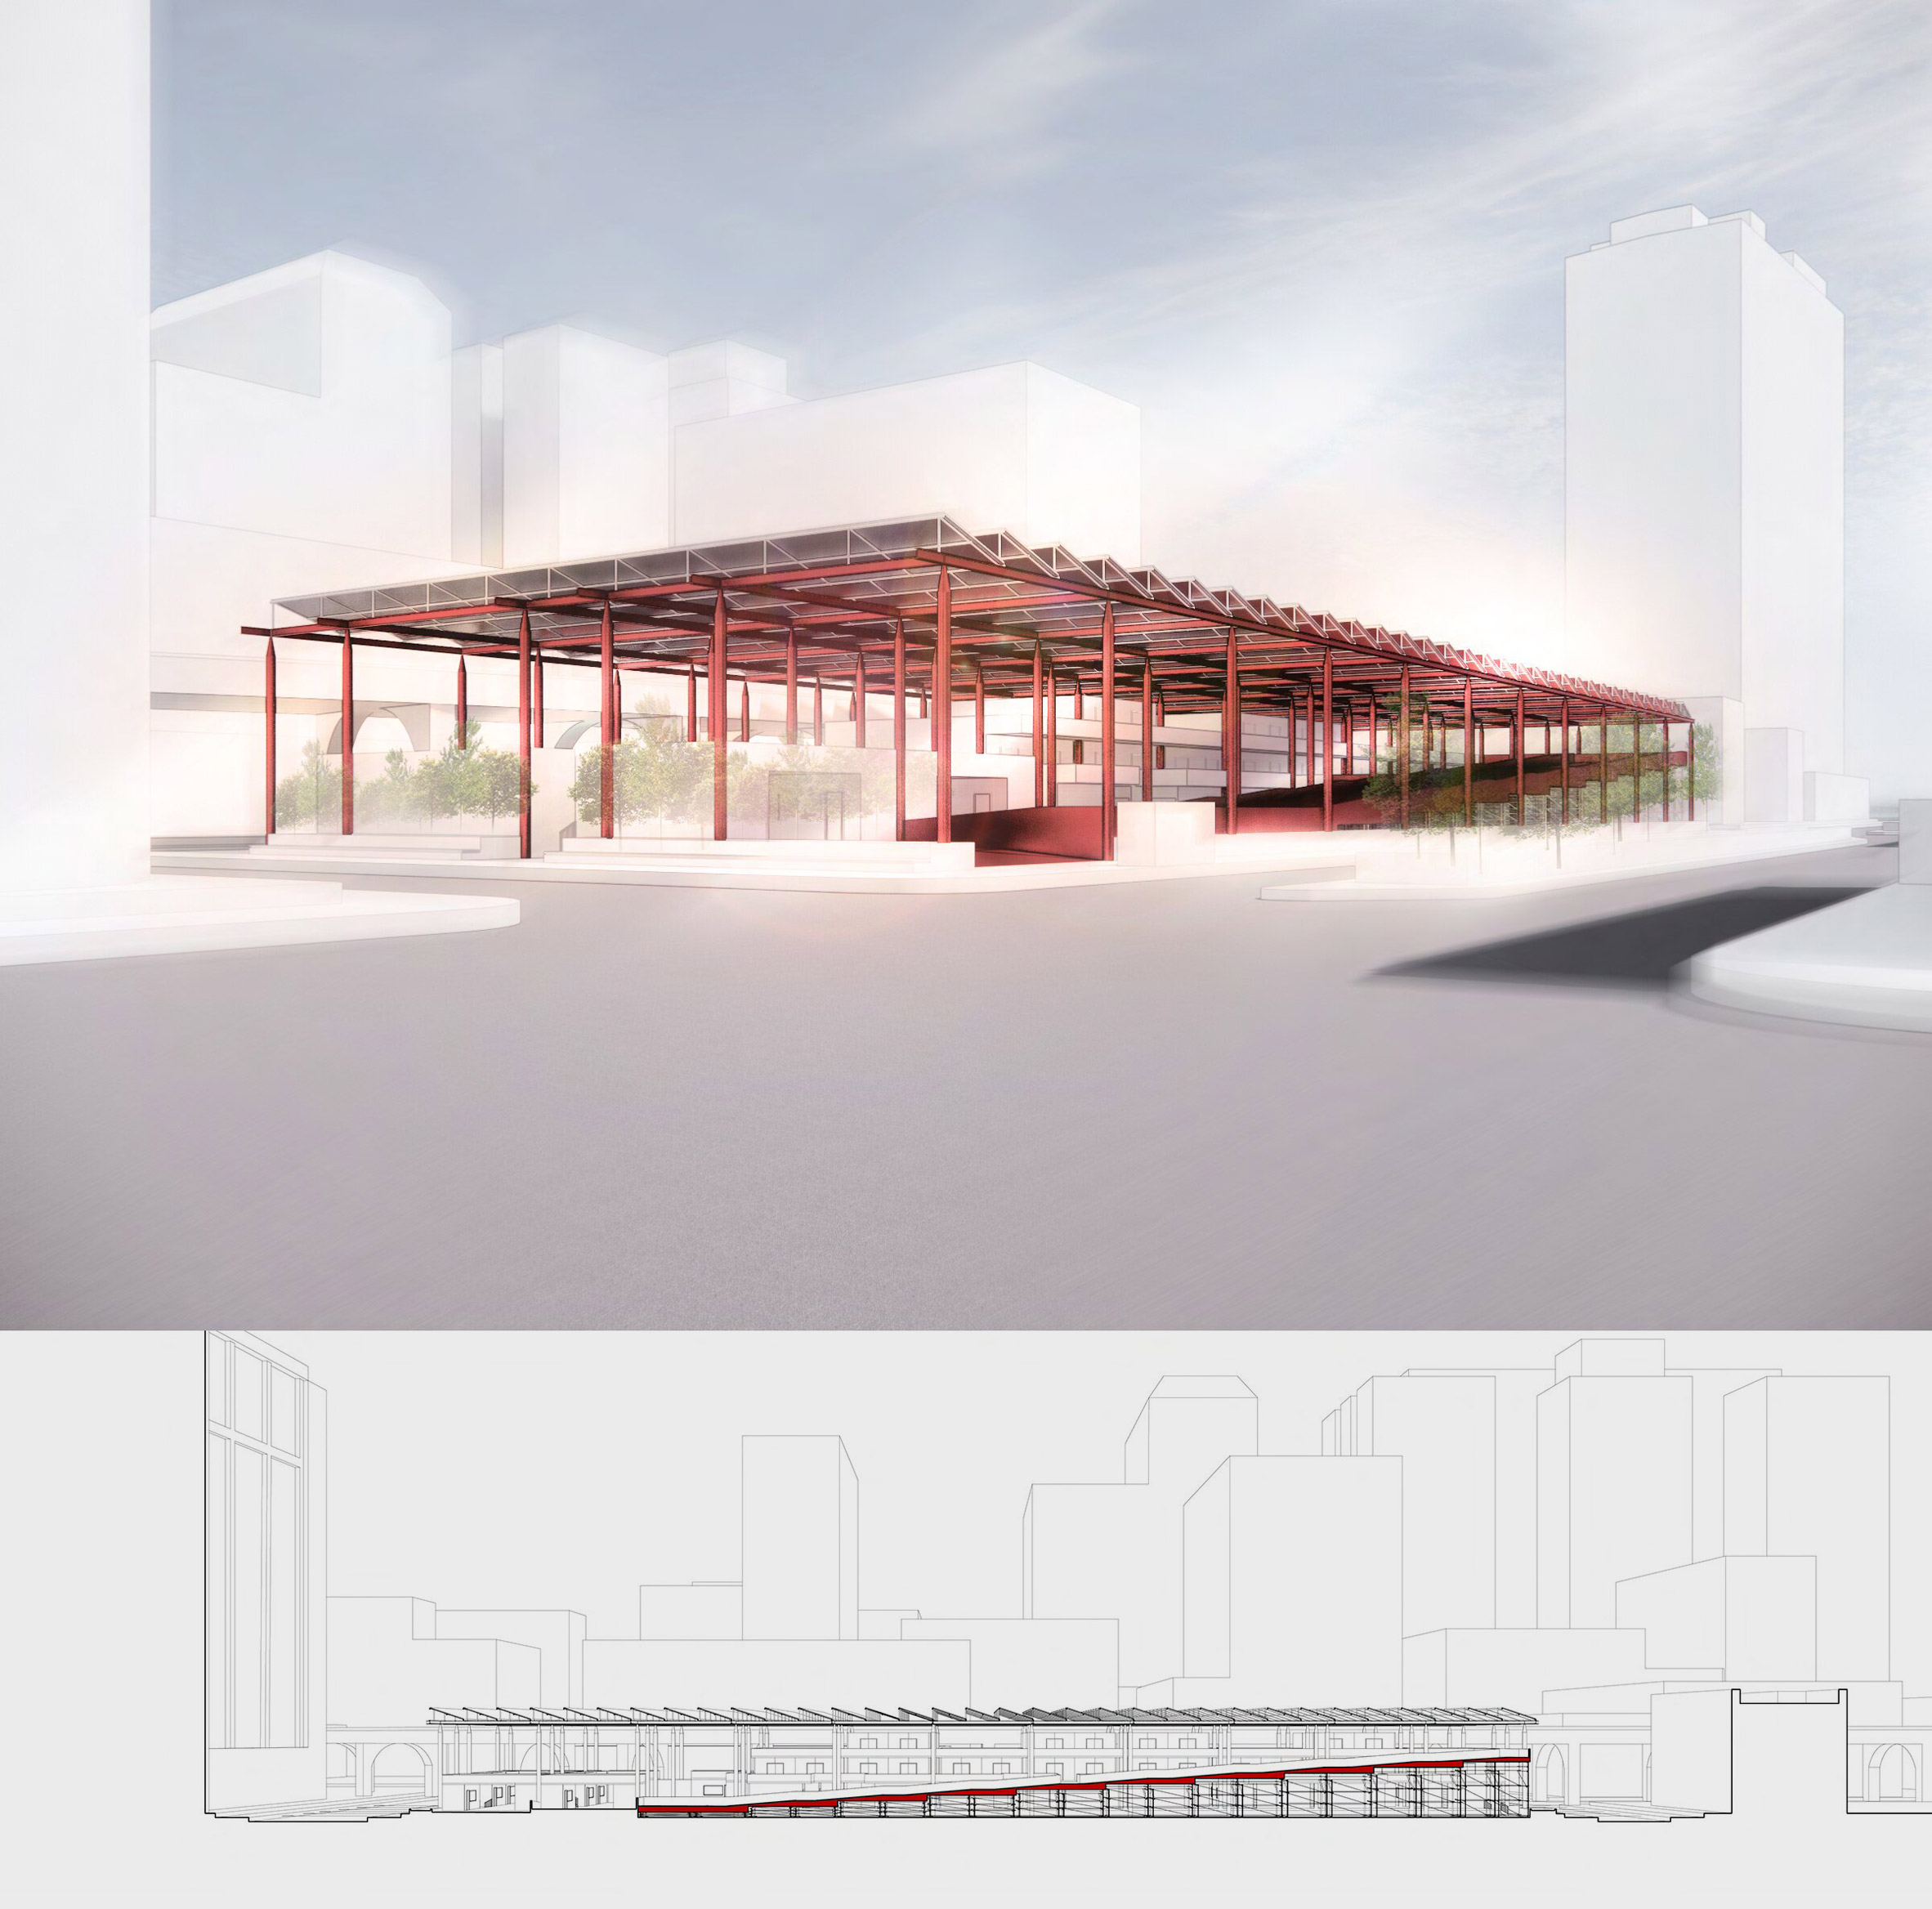 Section drawing and perspective render of a red open structure by a student at California Baptist University